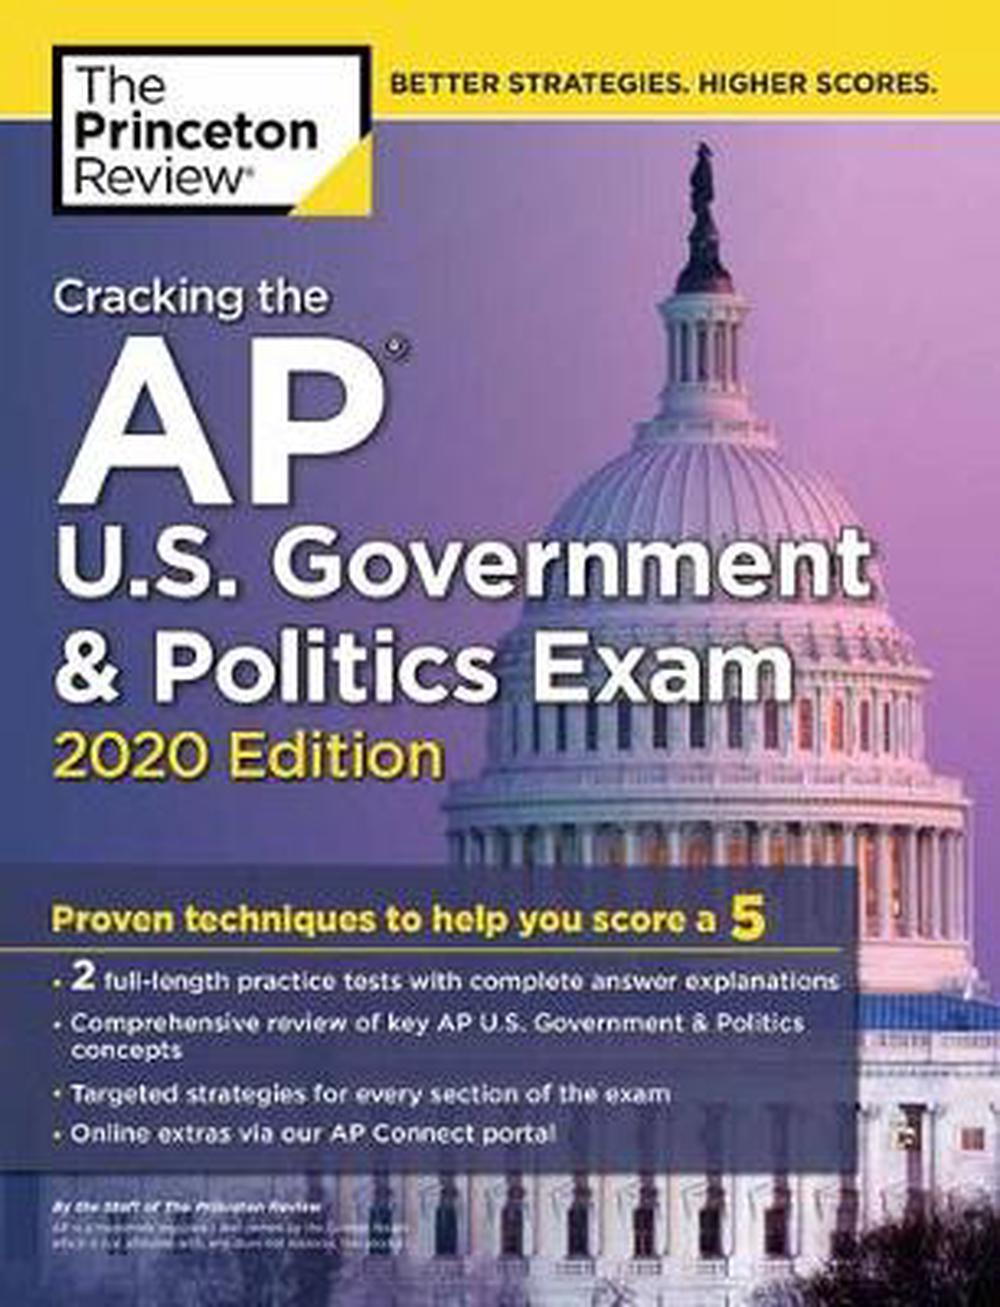 Cracking the AP U.S. Government and Politics Exam, 2020 Edition by